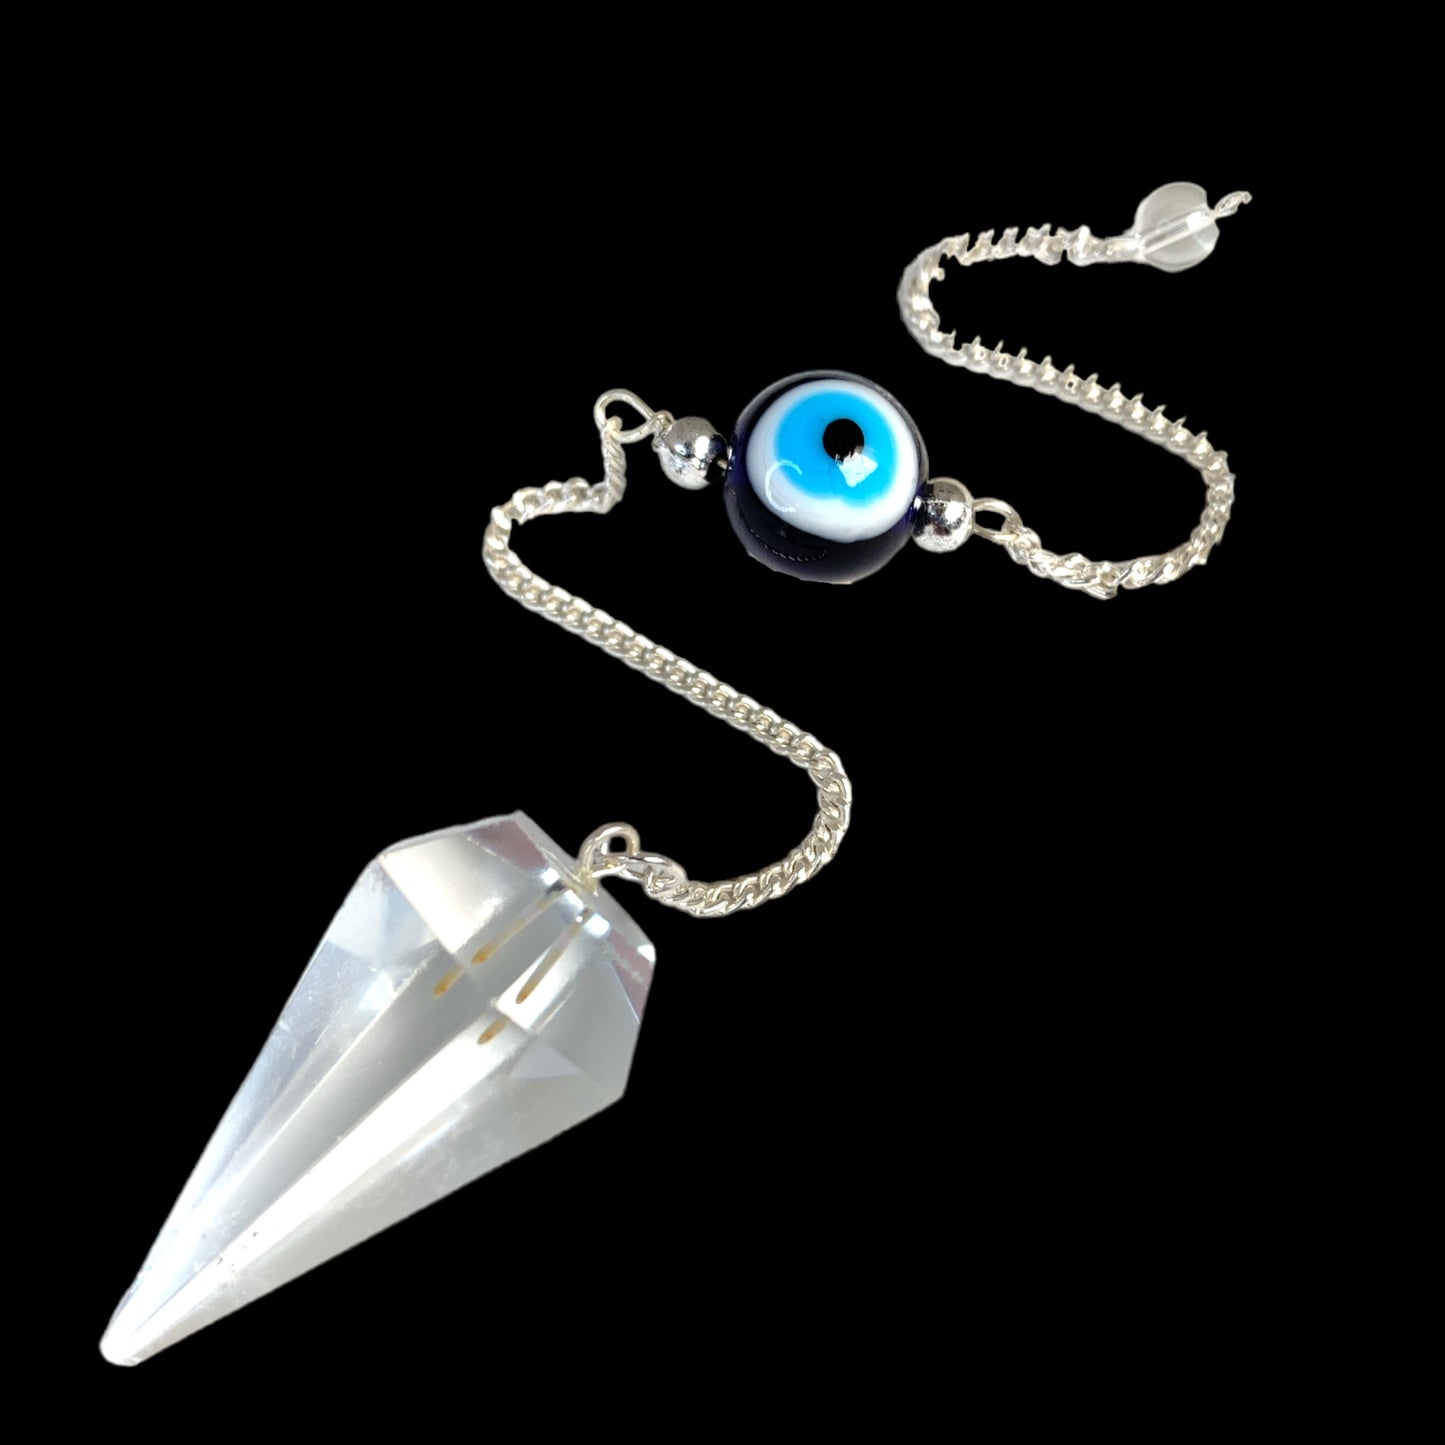 Crystal Quartz - 45mm - Faceted Pendulum With Silver Evil Eye Chain - NEW323